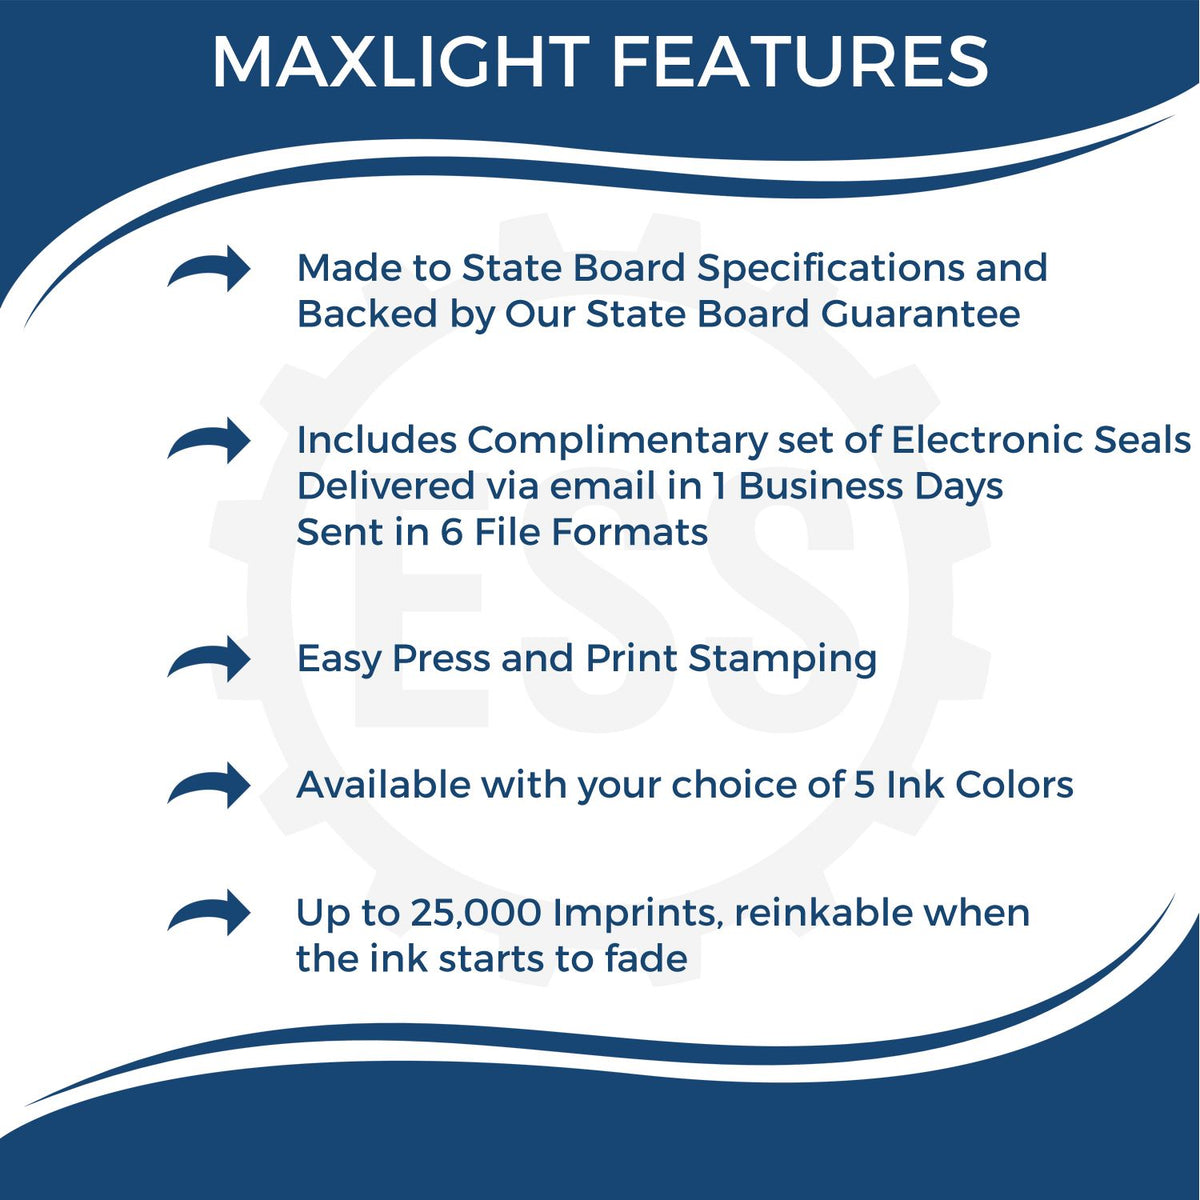 A picture of an infographic highlighting the selling points for the Premium MaxLight Pre-Inked Ohio Landscape Architectural Stamp